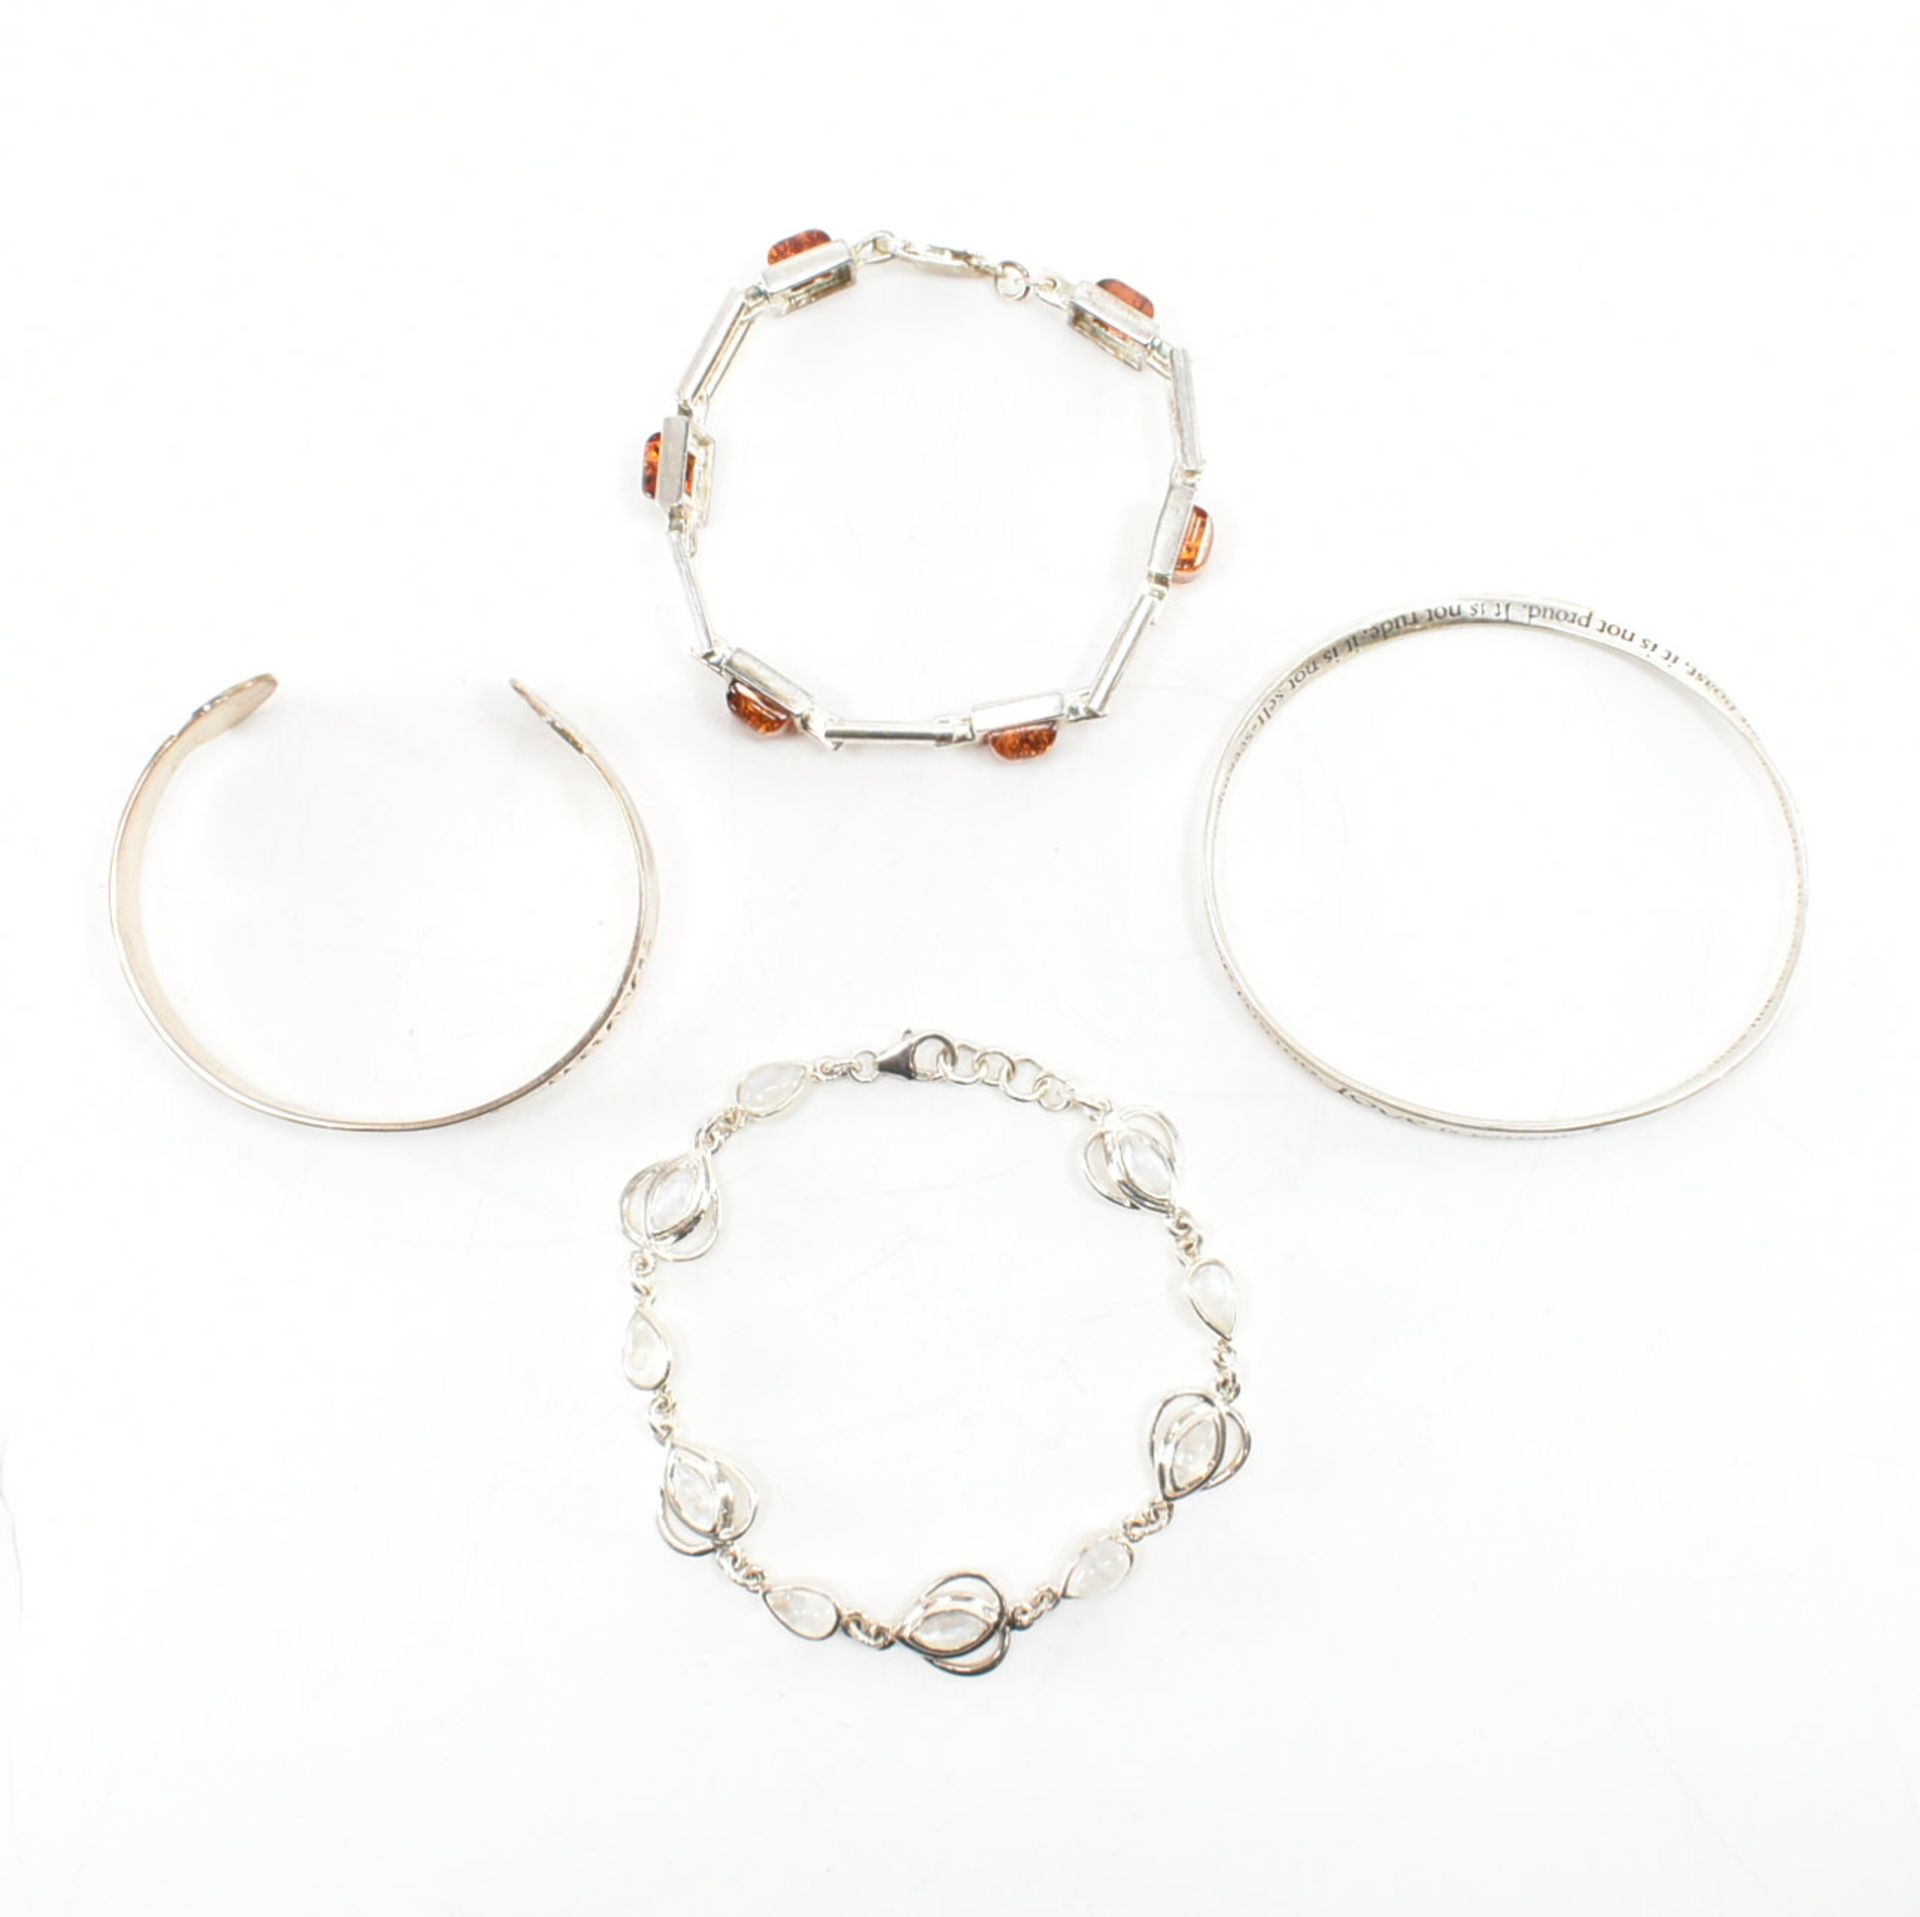 COLLECTION OF SILVER BRACELETS & BANGLES